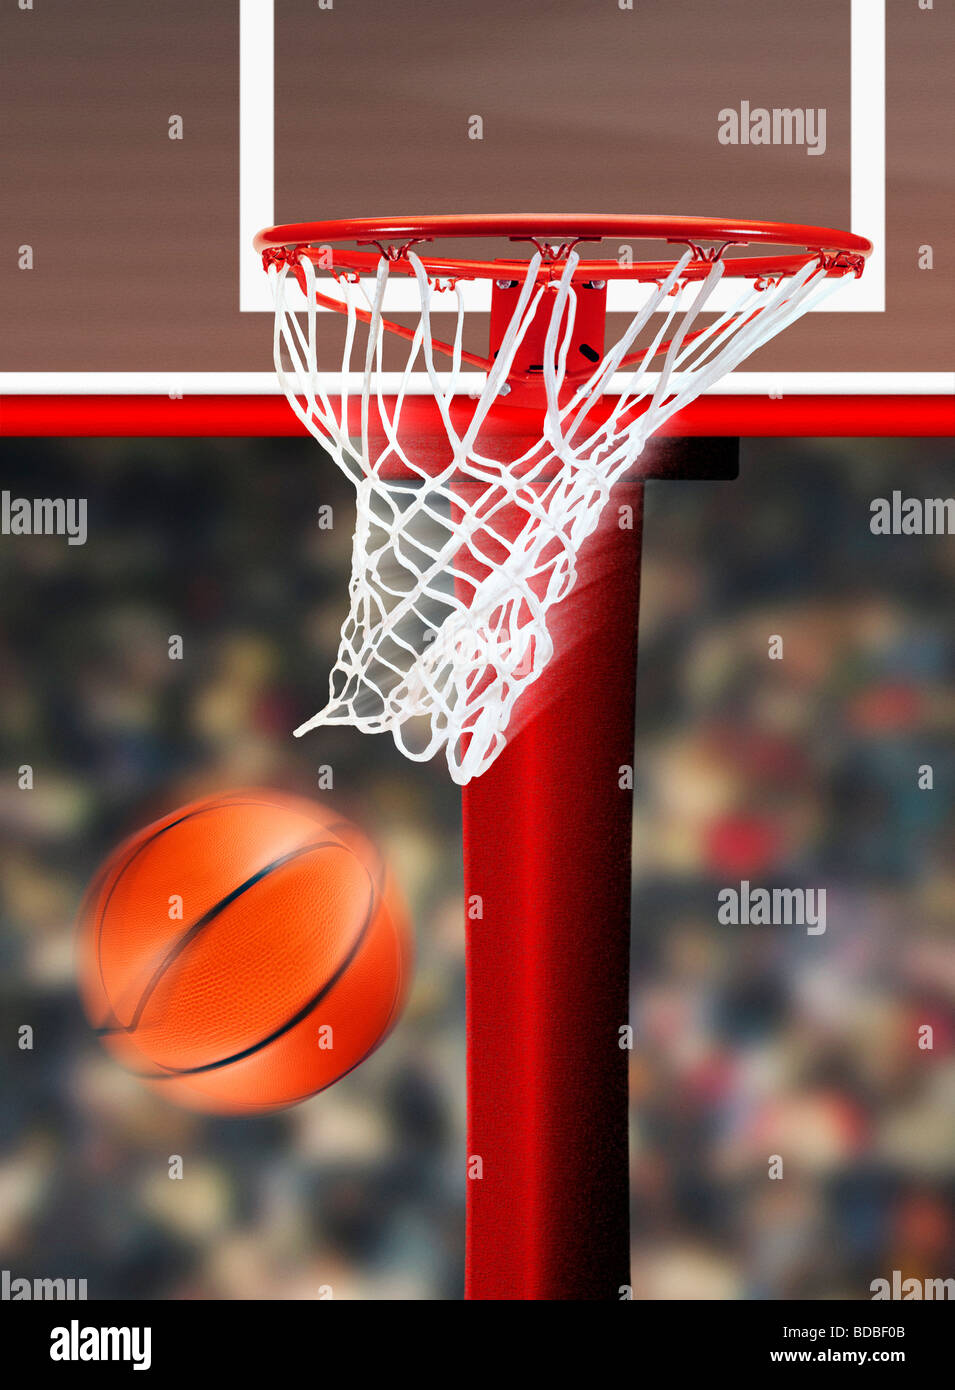 Close up of basketball hoop and pole, with basketball going through hoop and ropes showing movement, sports crowd in background. Stock Photo